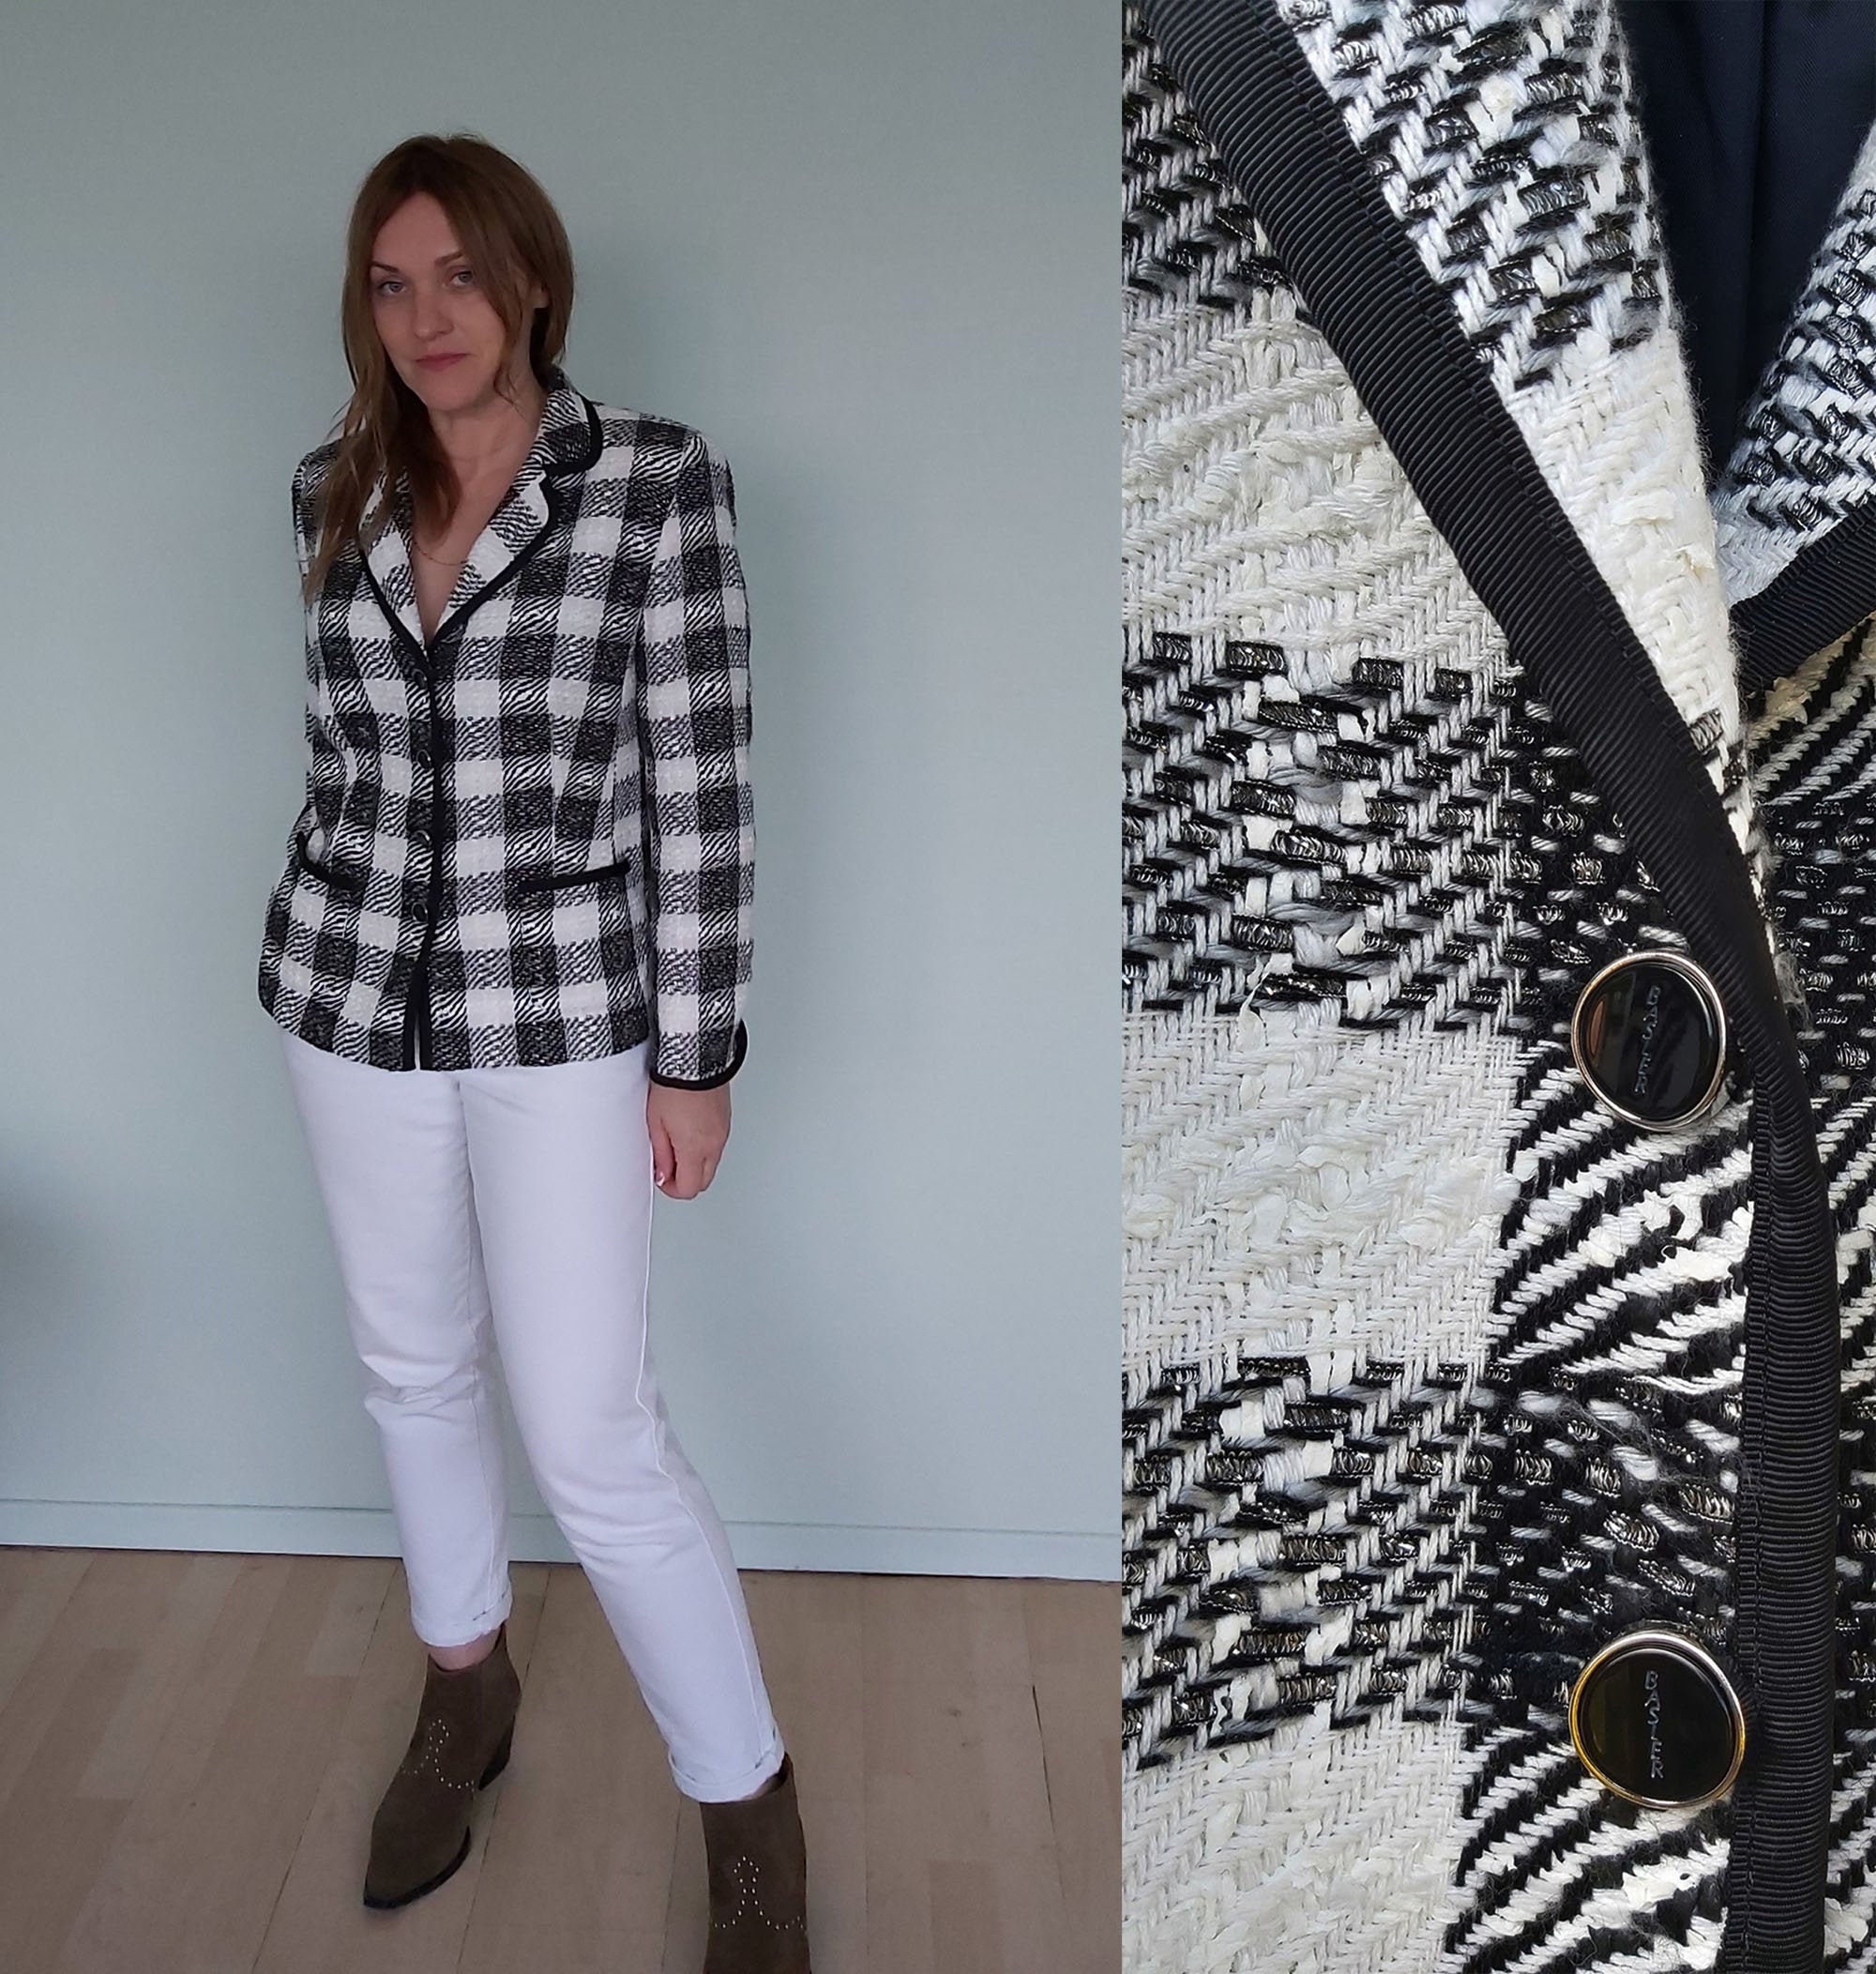 Chanel Chequered Tweed Jacket